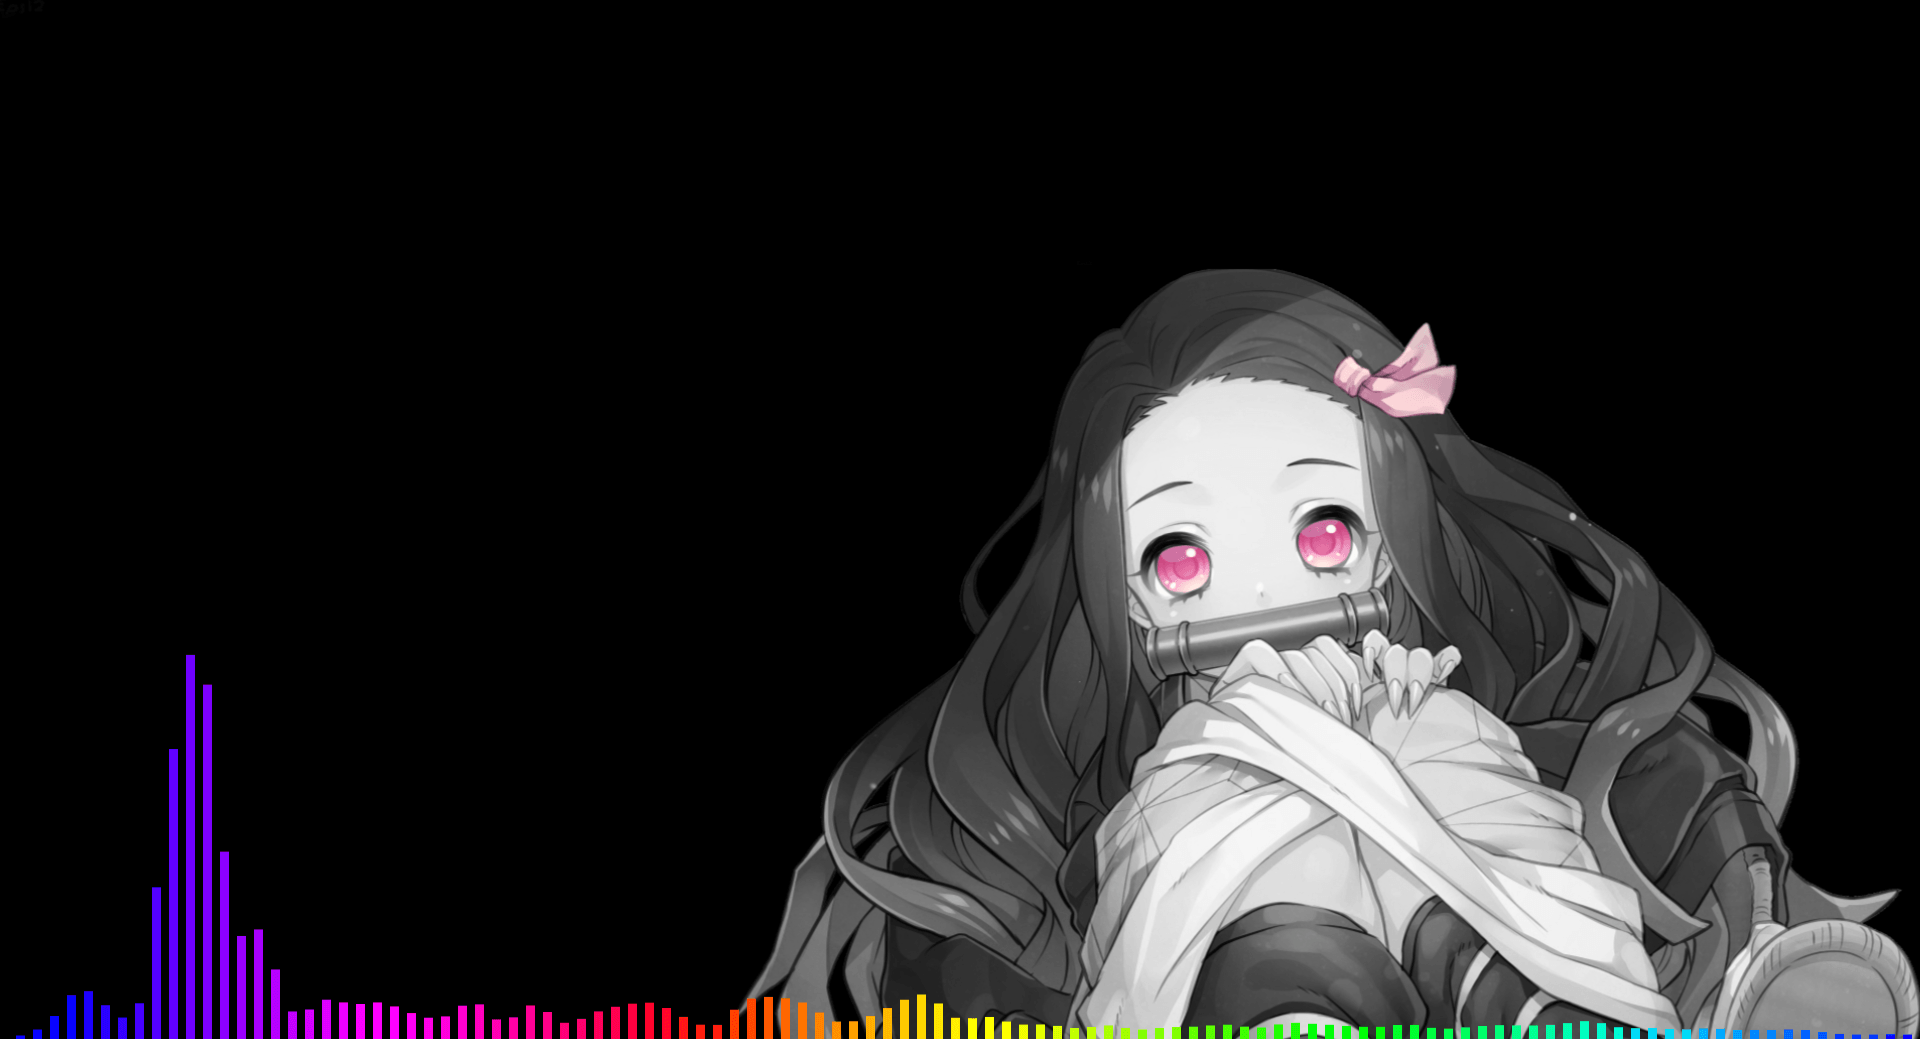 Steam Workshop - Grayscale Anime Wallpaper w/ Visualizers